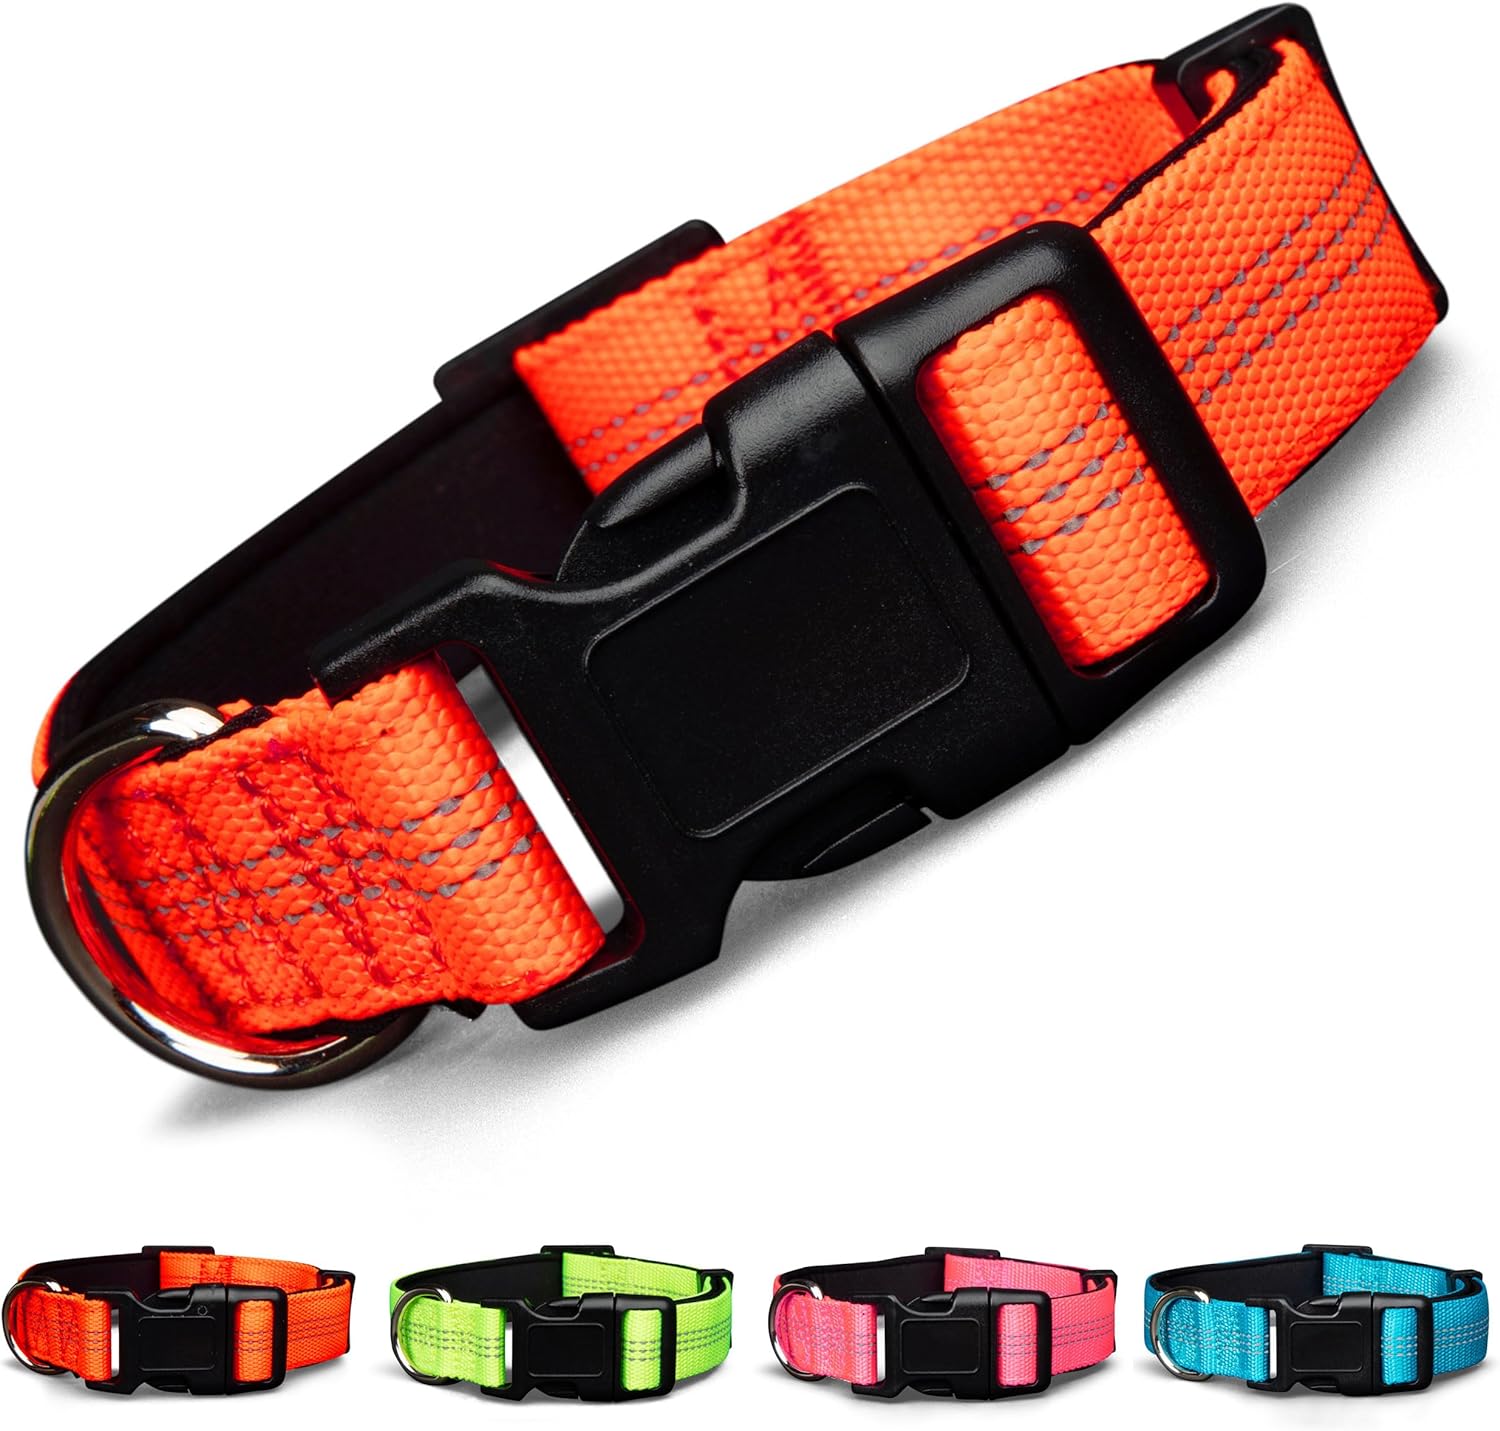 BLAZIN Color Me Happy! Reflective Dog Collar for Day and Night - Adjustable Soft Neoprene Padded Dog Collar in 4 Vibrant Colors - Keeps Dogs Safe and Stylish - for Every Day Use (Large, Orange)